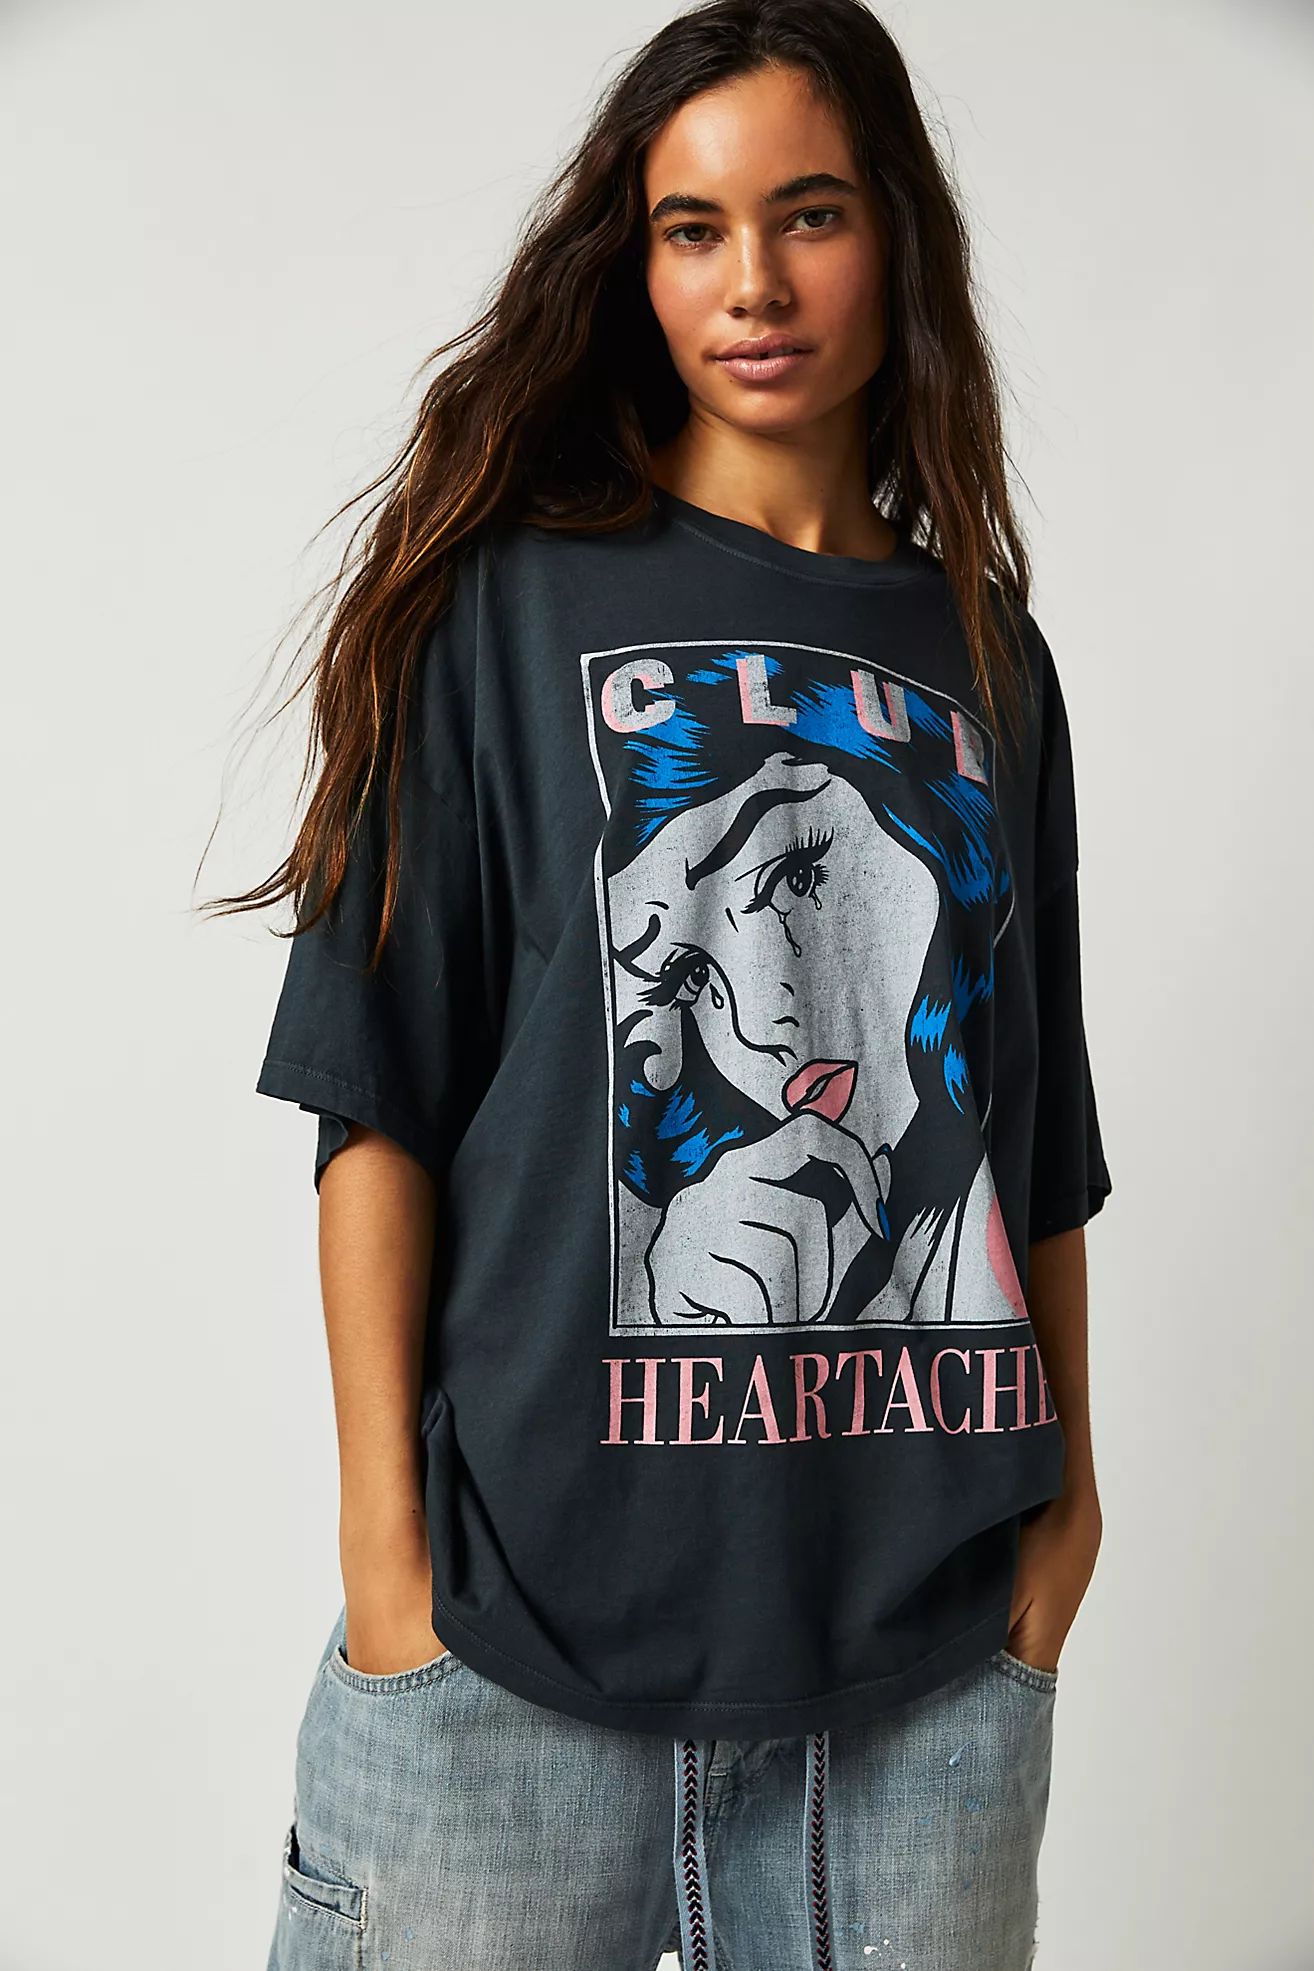 Club Heartache One Size Tee | Free People (Global - UK&FR Excluded)